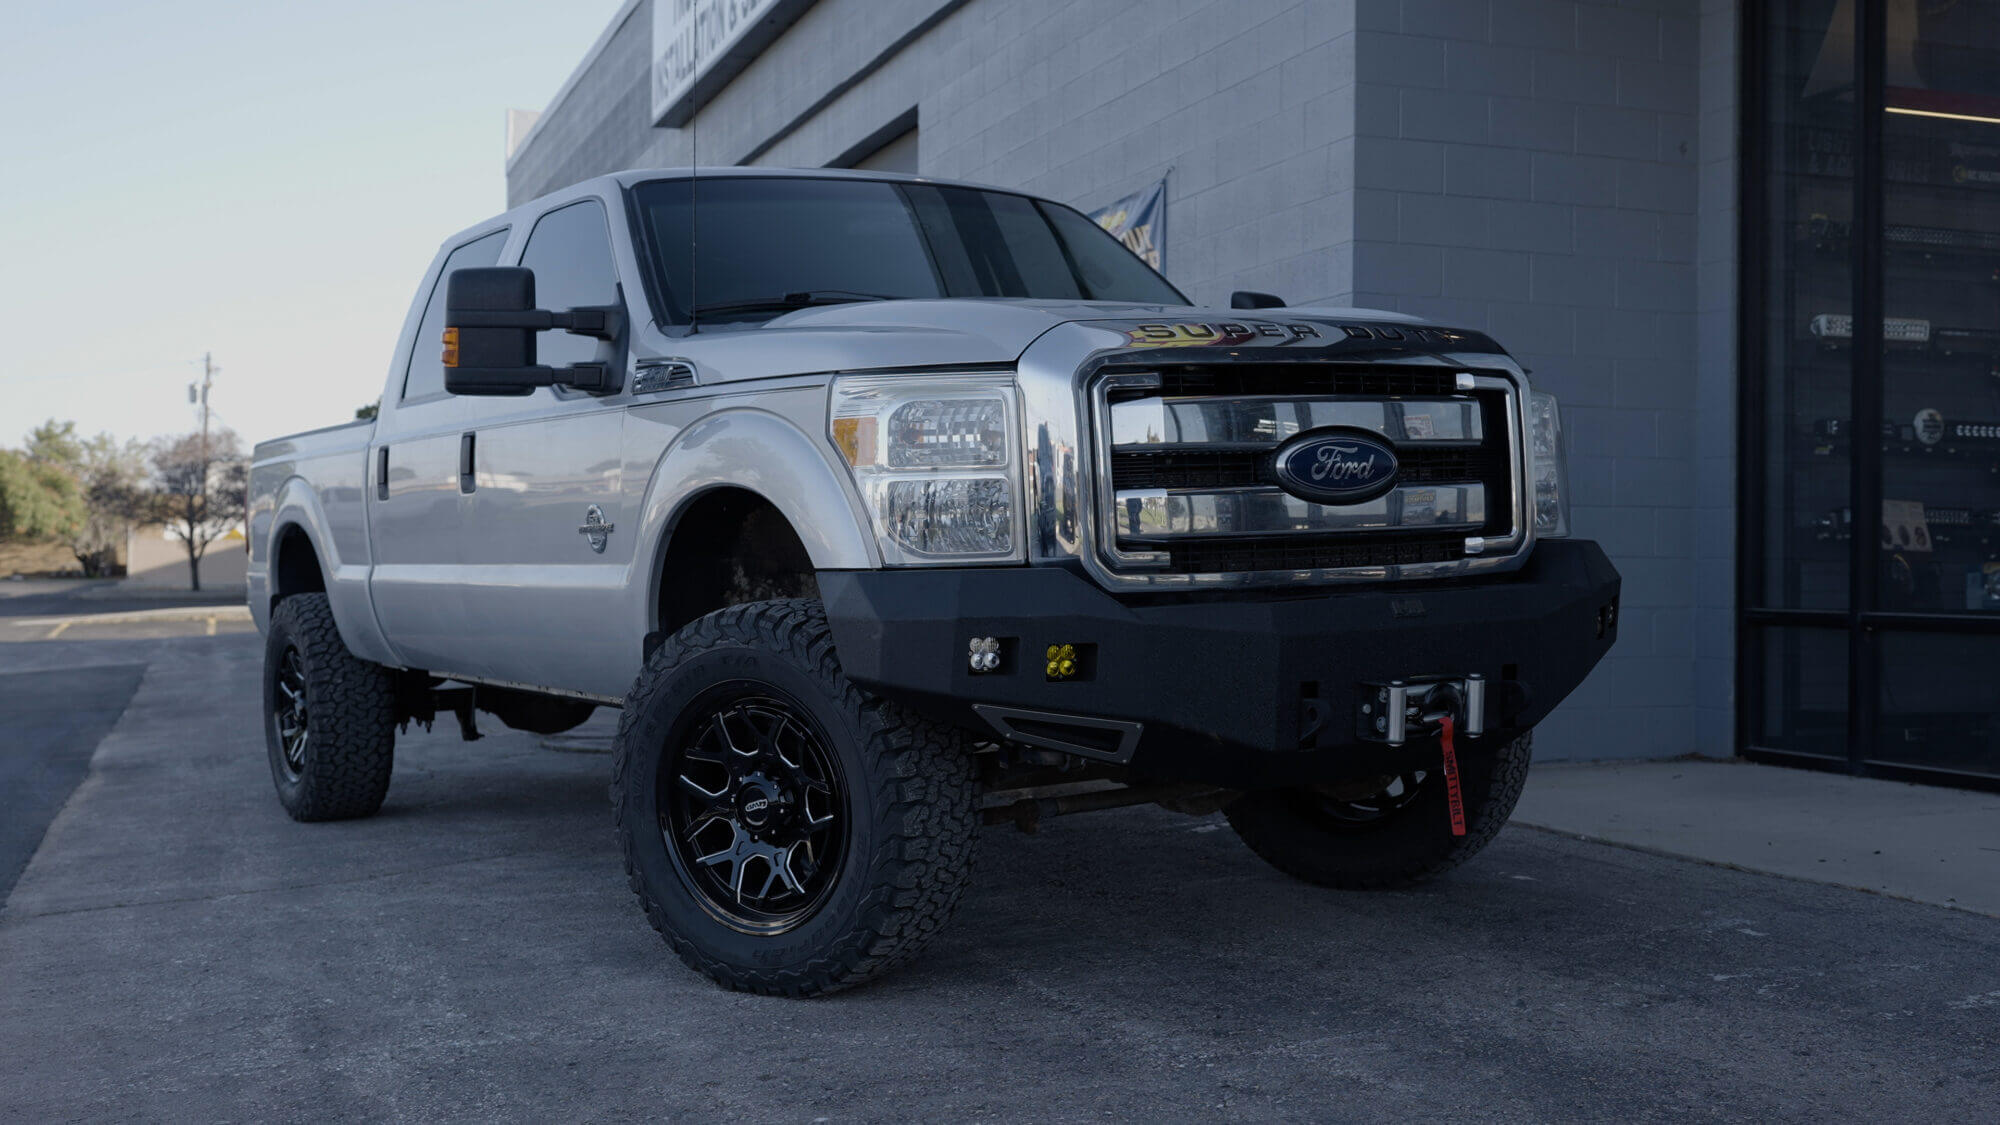 01 Ford Super Duty Warfighter Made